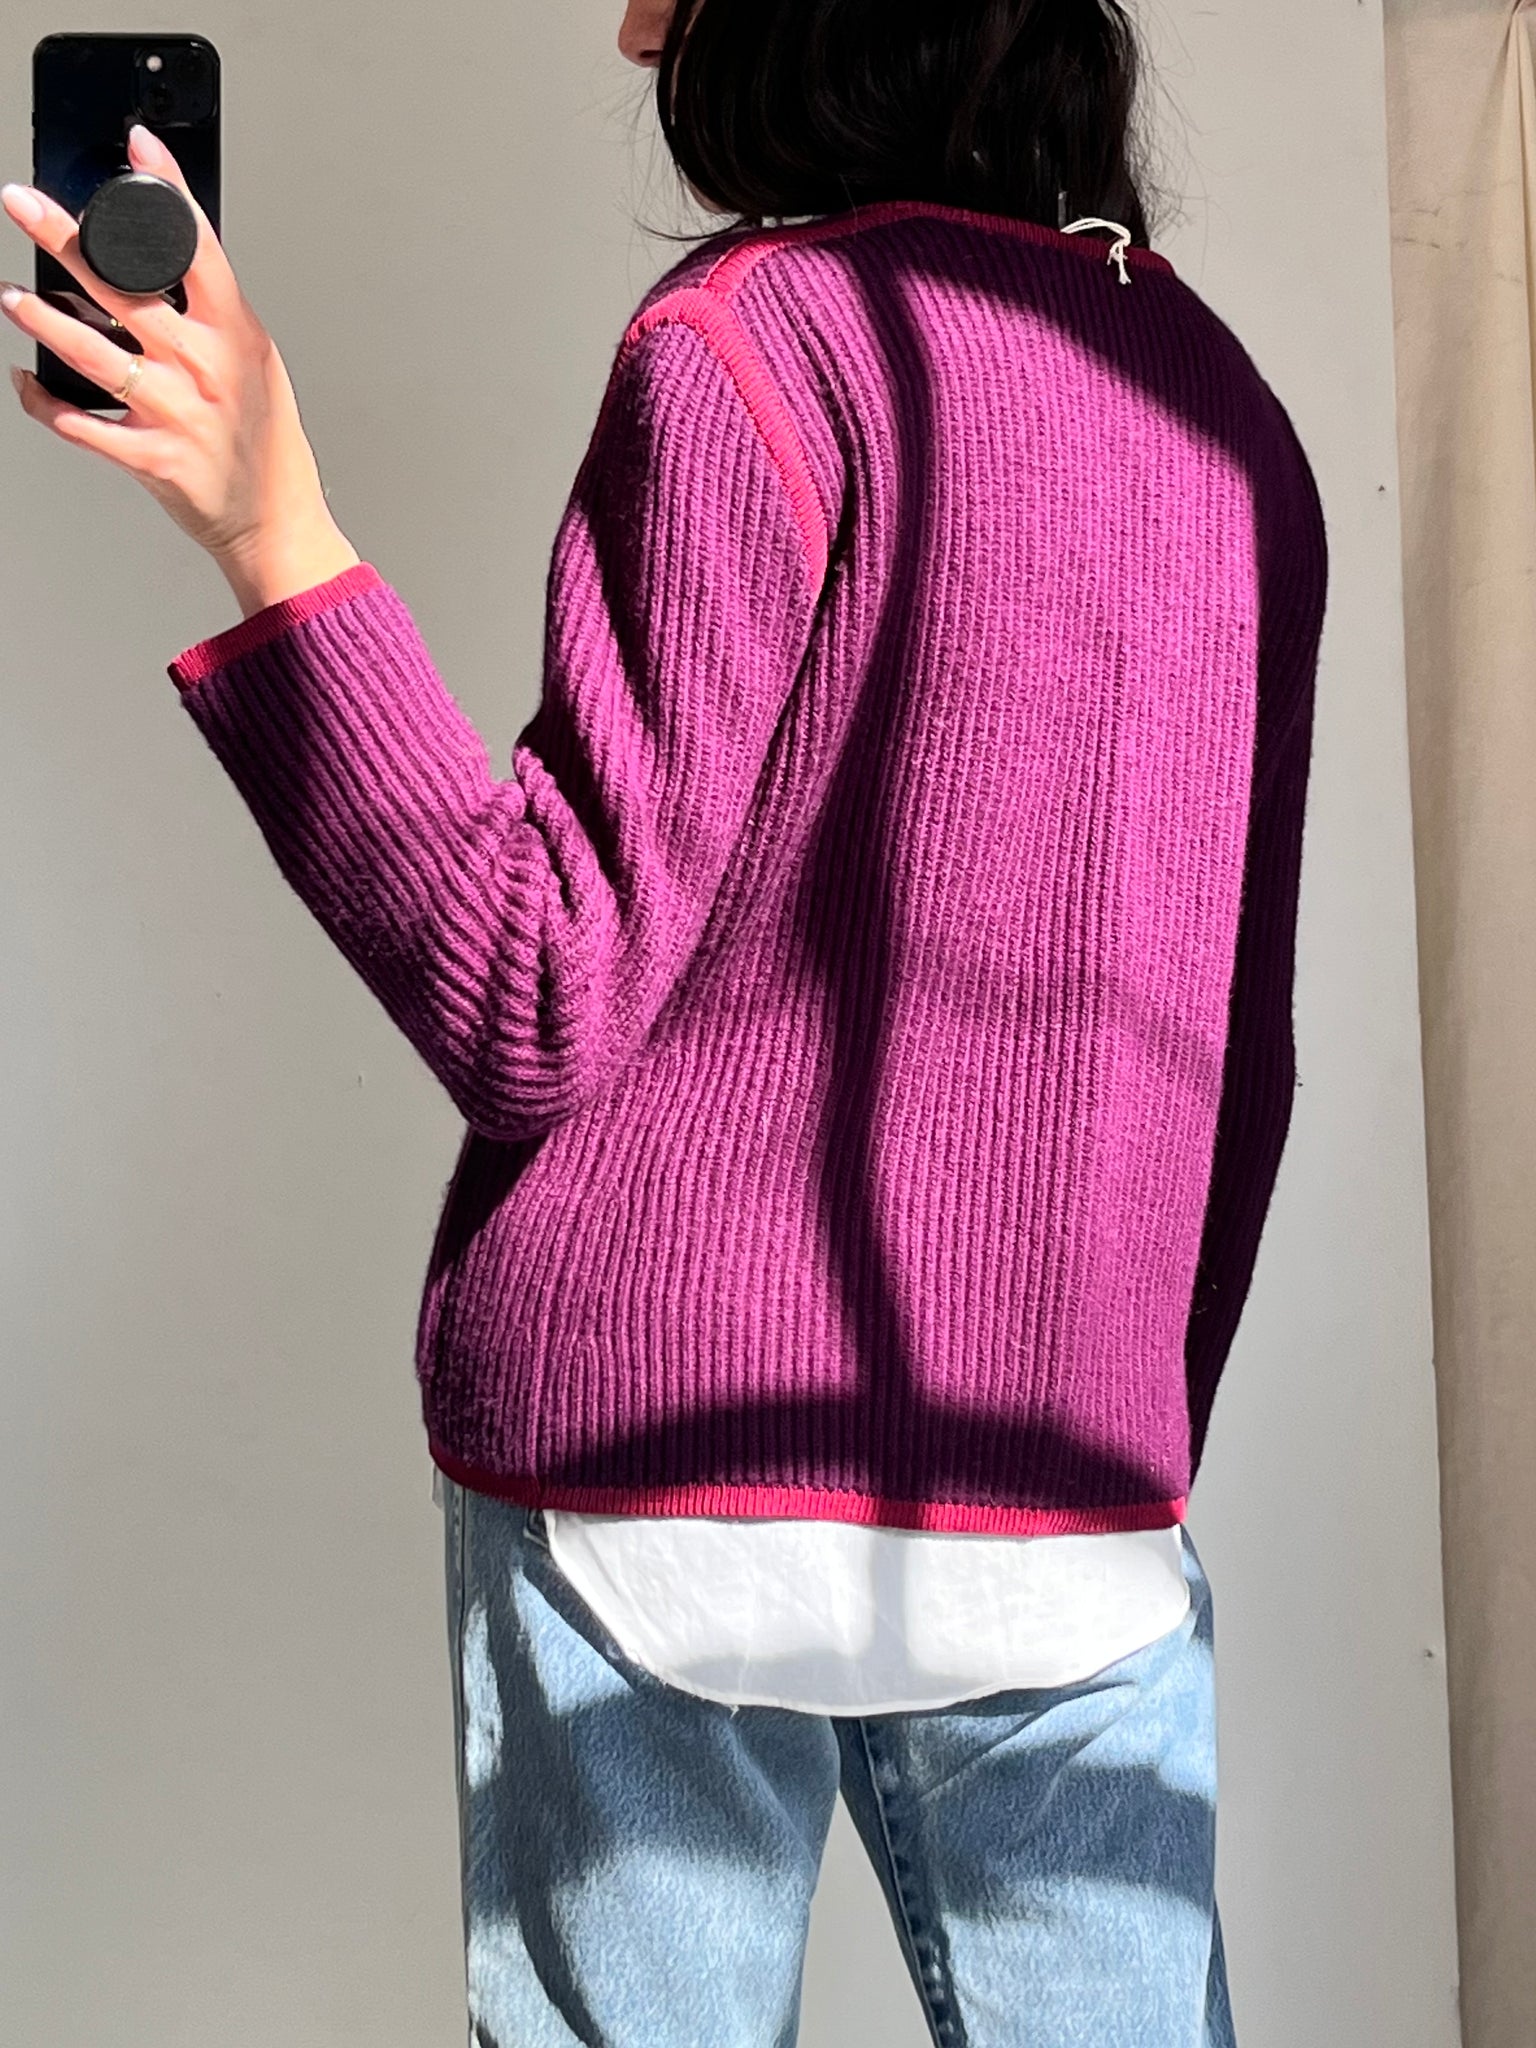 Vintage 80s YSL Rive Gauche purple wool cardigan with covered edge